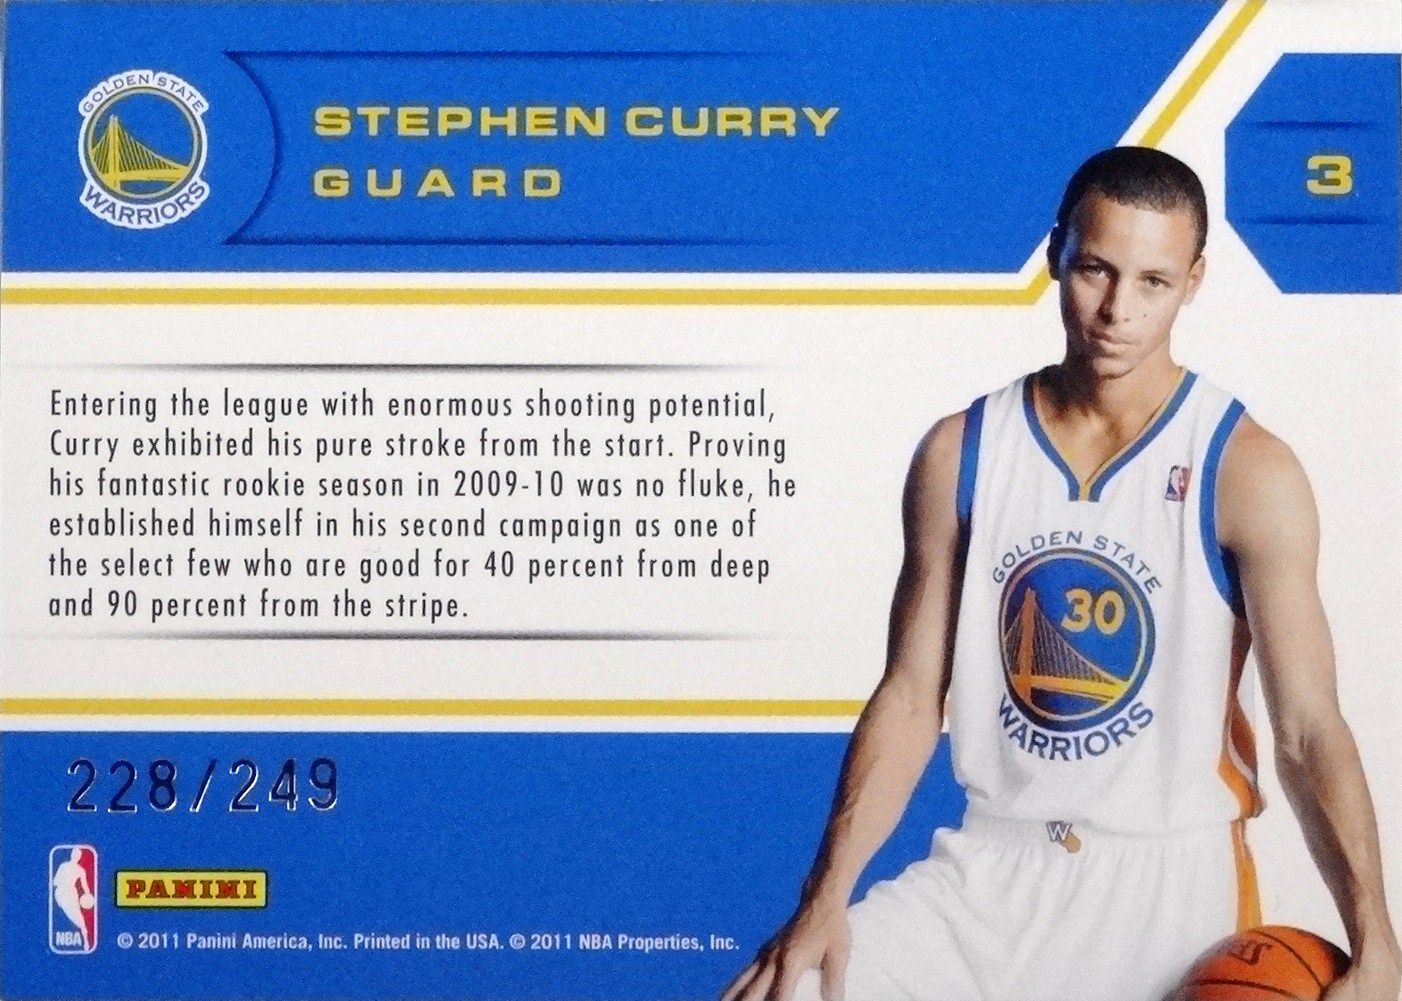 2010-11 Totally Certified Potential #3 Stephen Curry 249 - Back.JPG